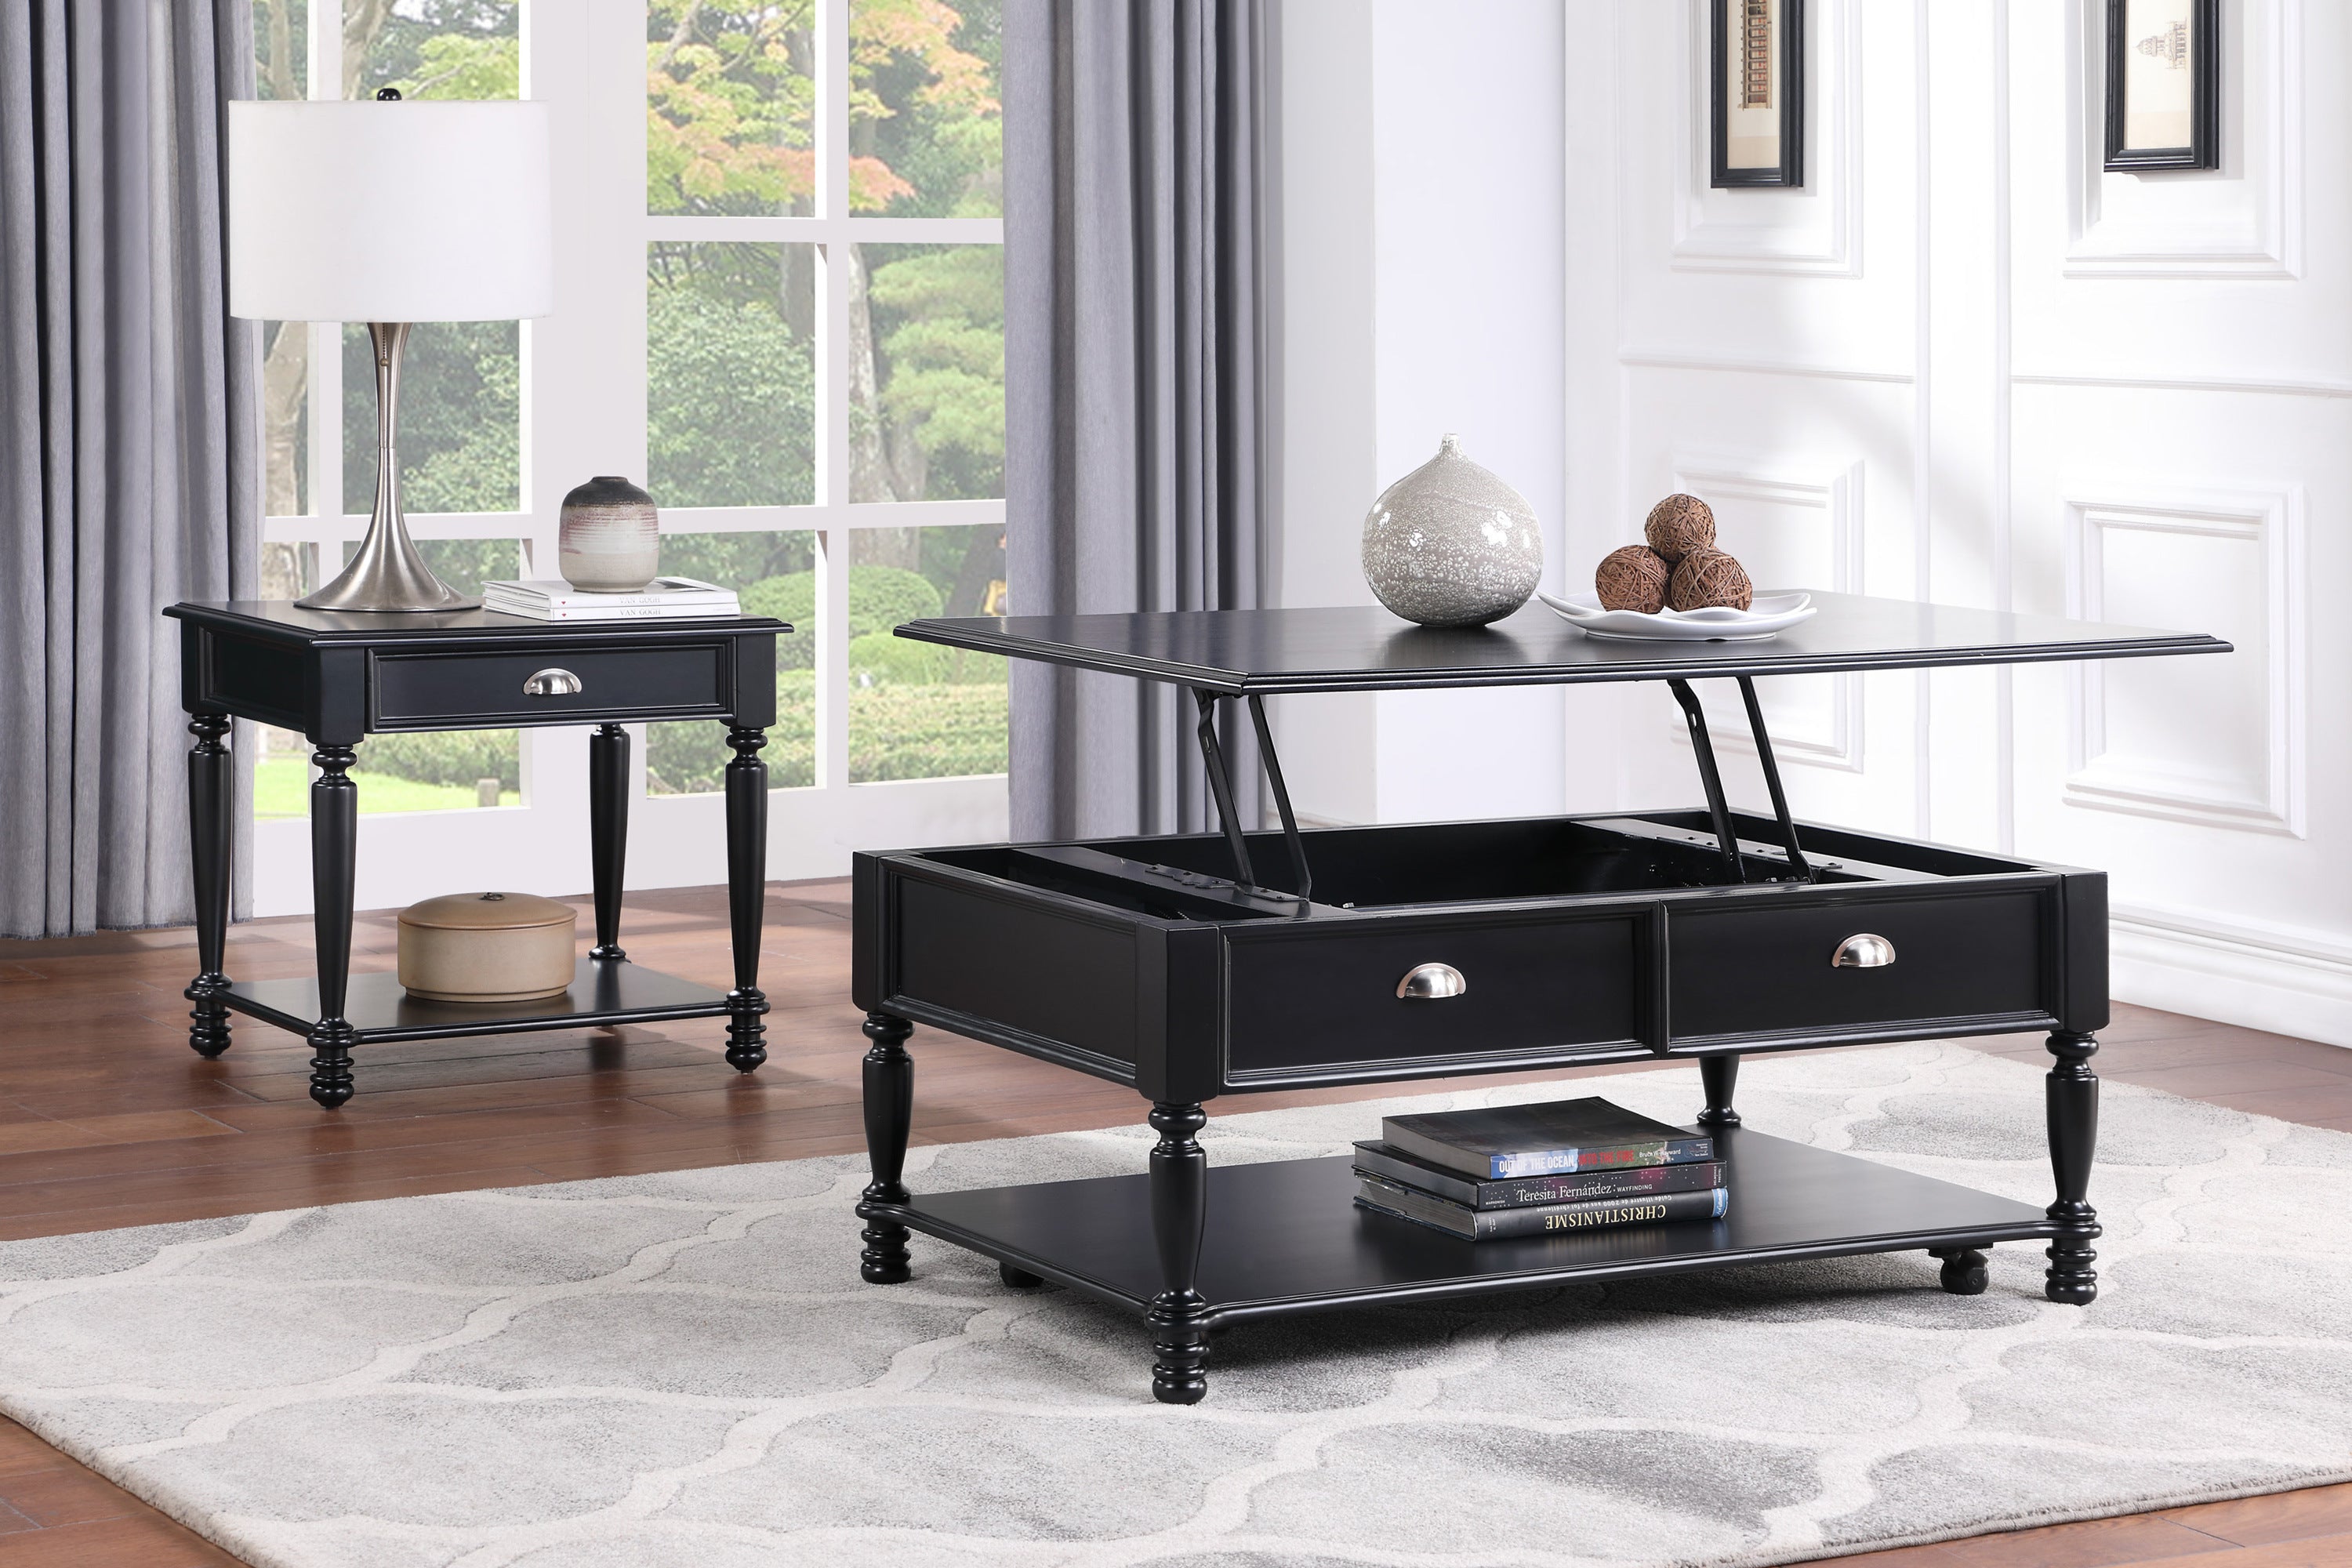 Classic Design Black Finish Lift Top Cocktail Table with Casters Bottom Shelf Wooden